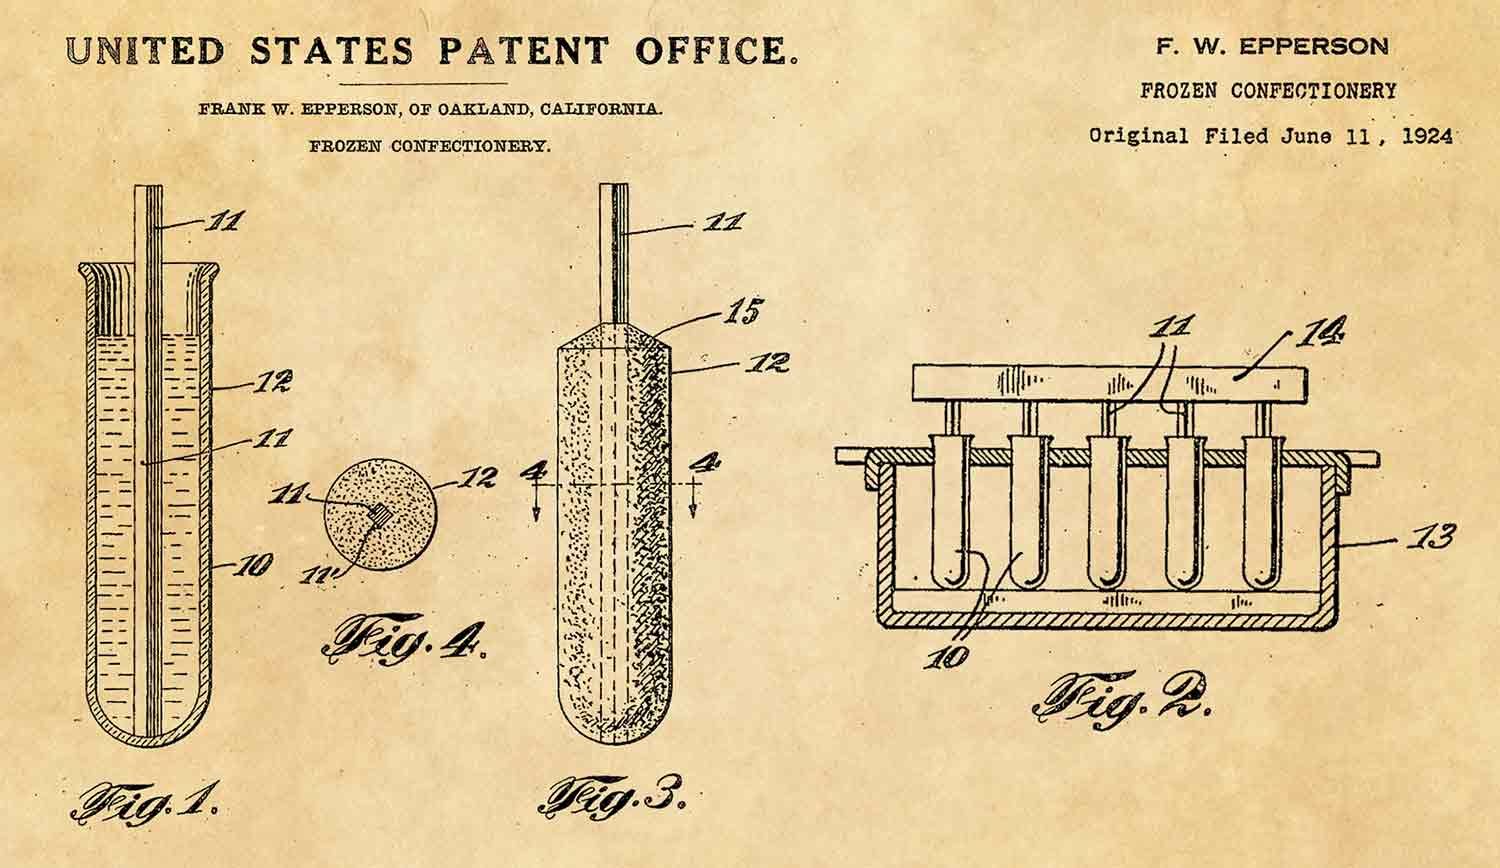 A patent drawing showing liquid in a mold with a stick, a frozen popsicle, and five popsicles in a mold.